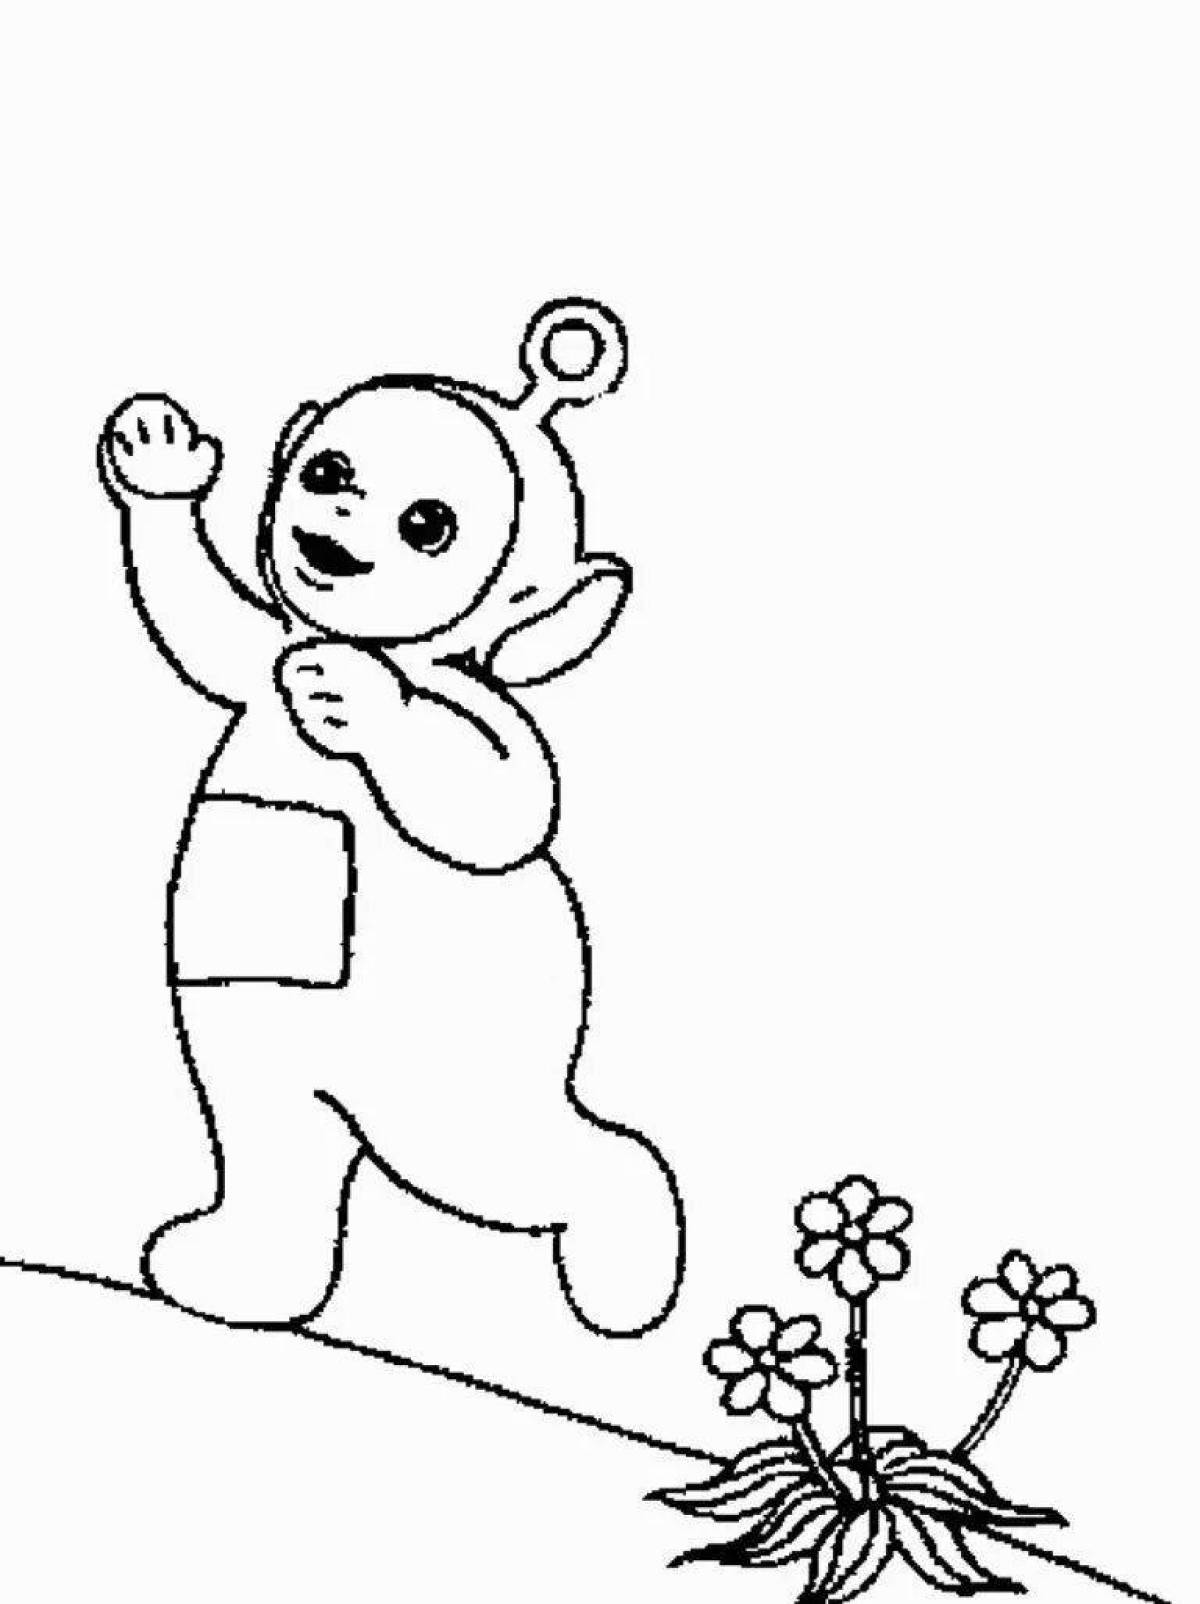 Colorful coloring pages of the Teletubbies